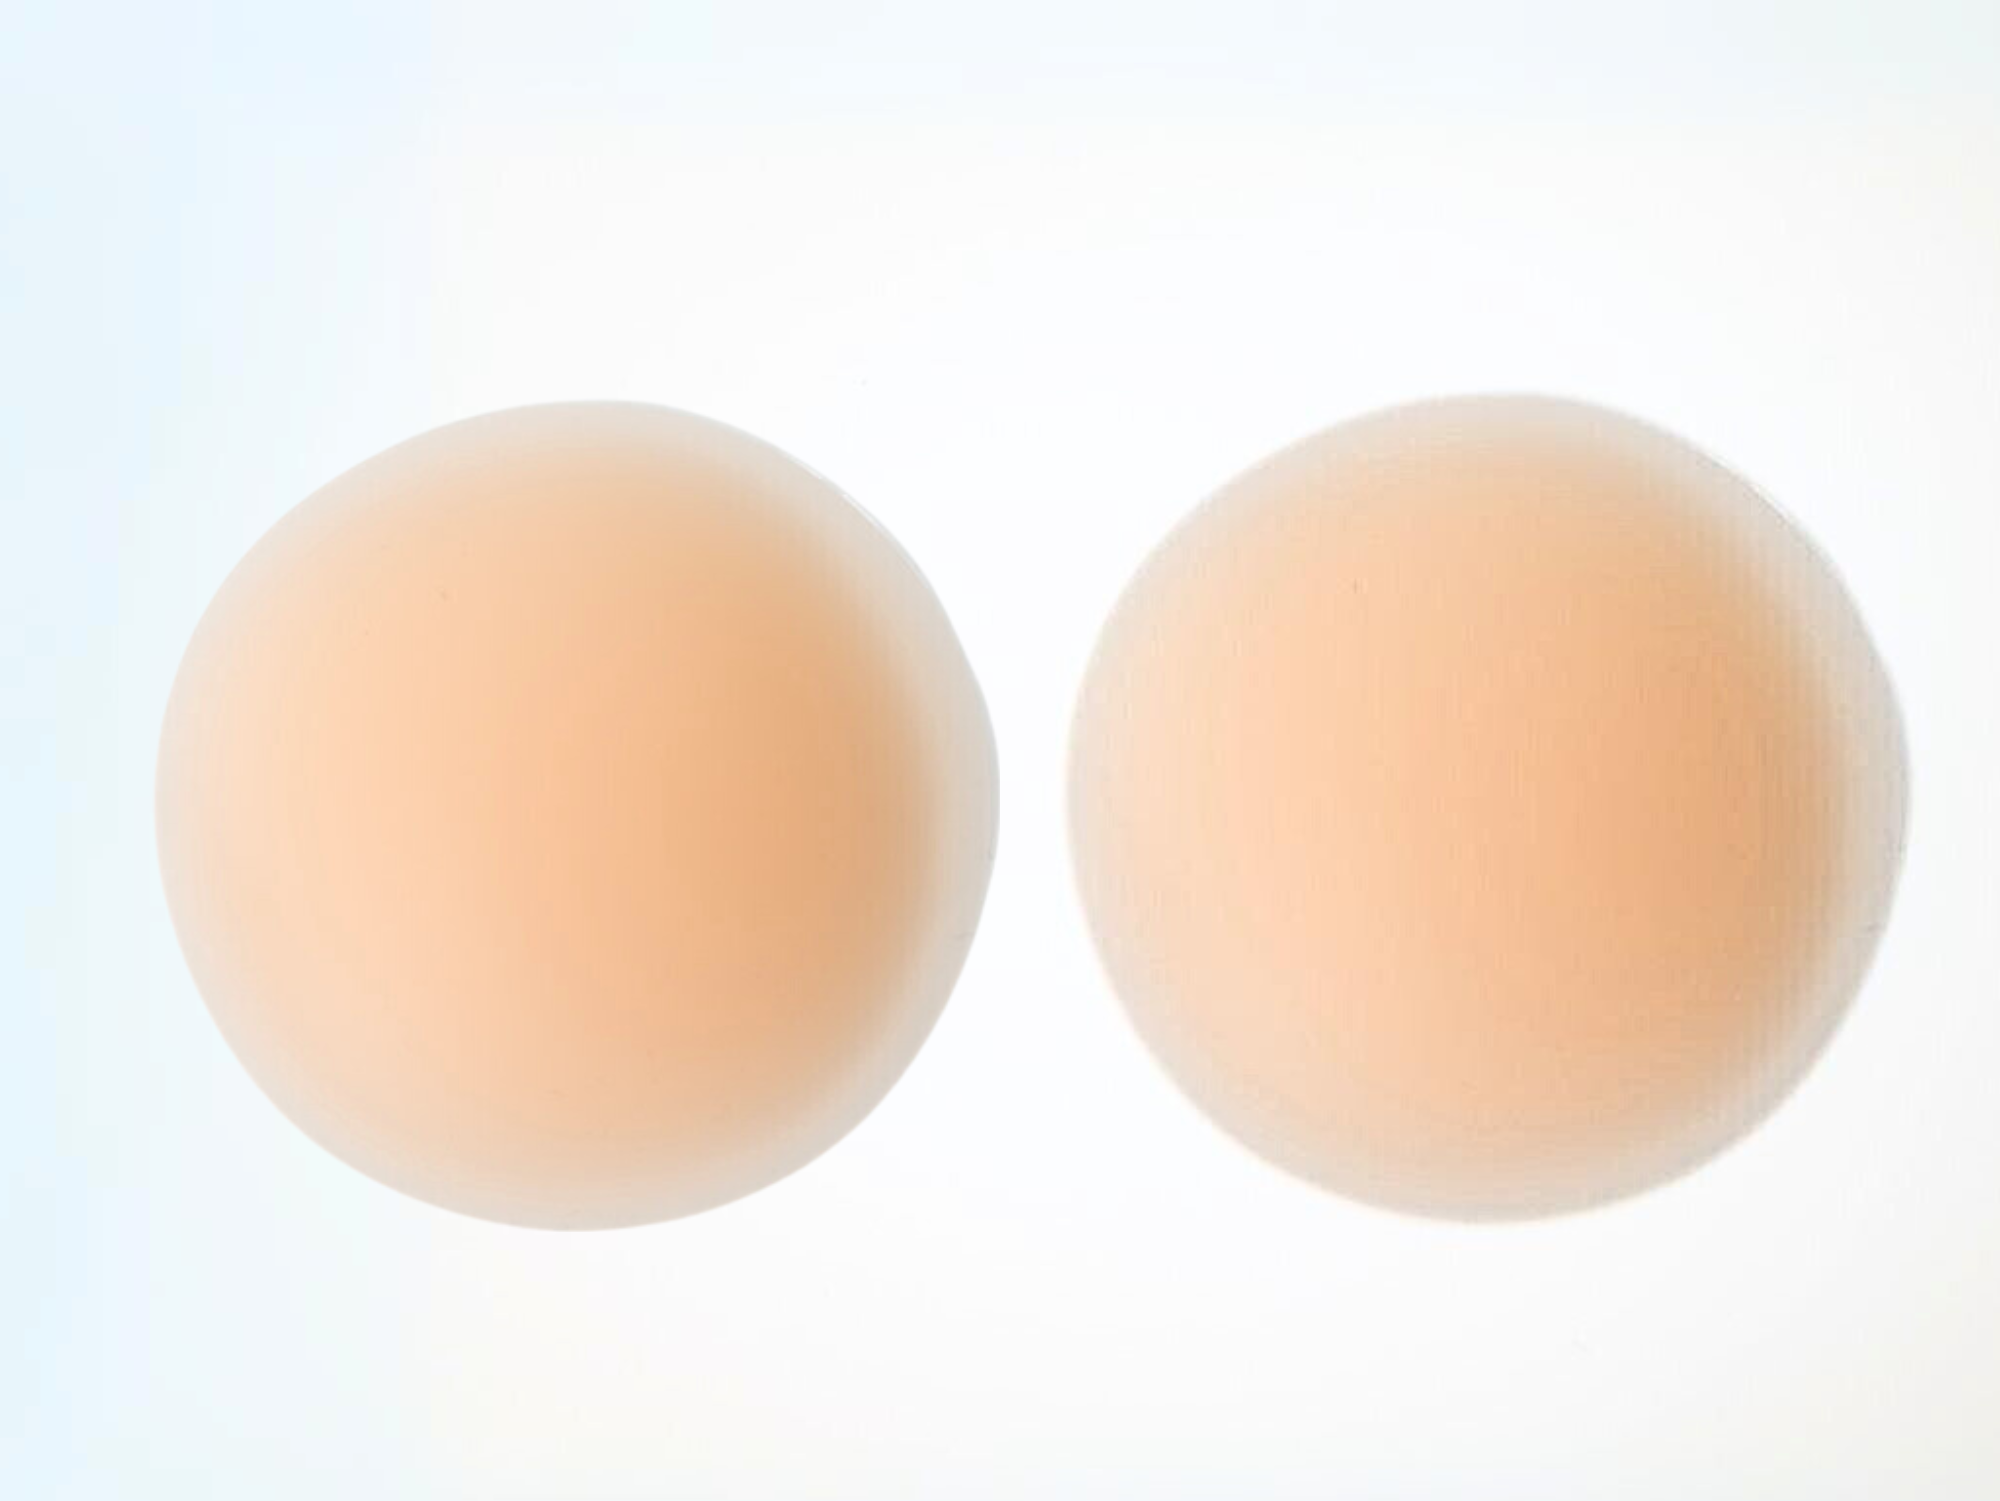 A pair of pinky flesh tone silicone nipple covers for rosy skin tones.